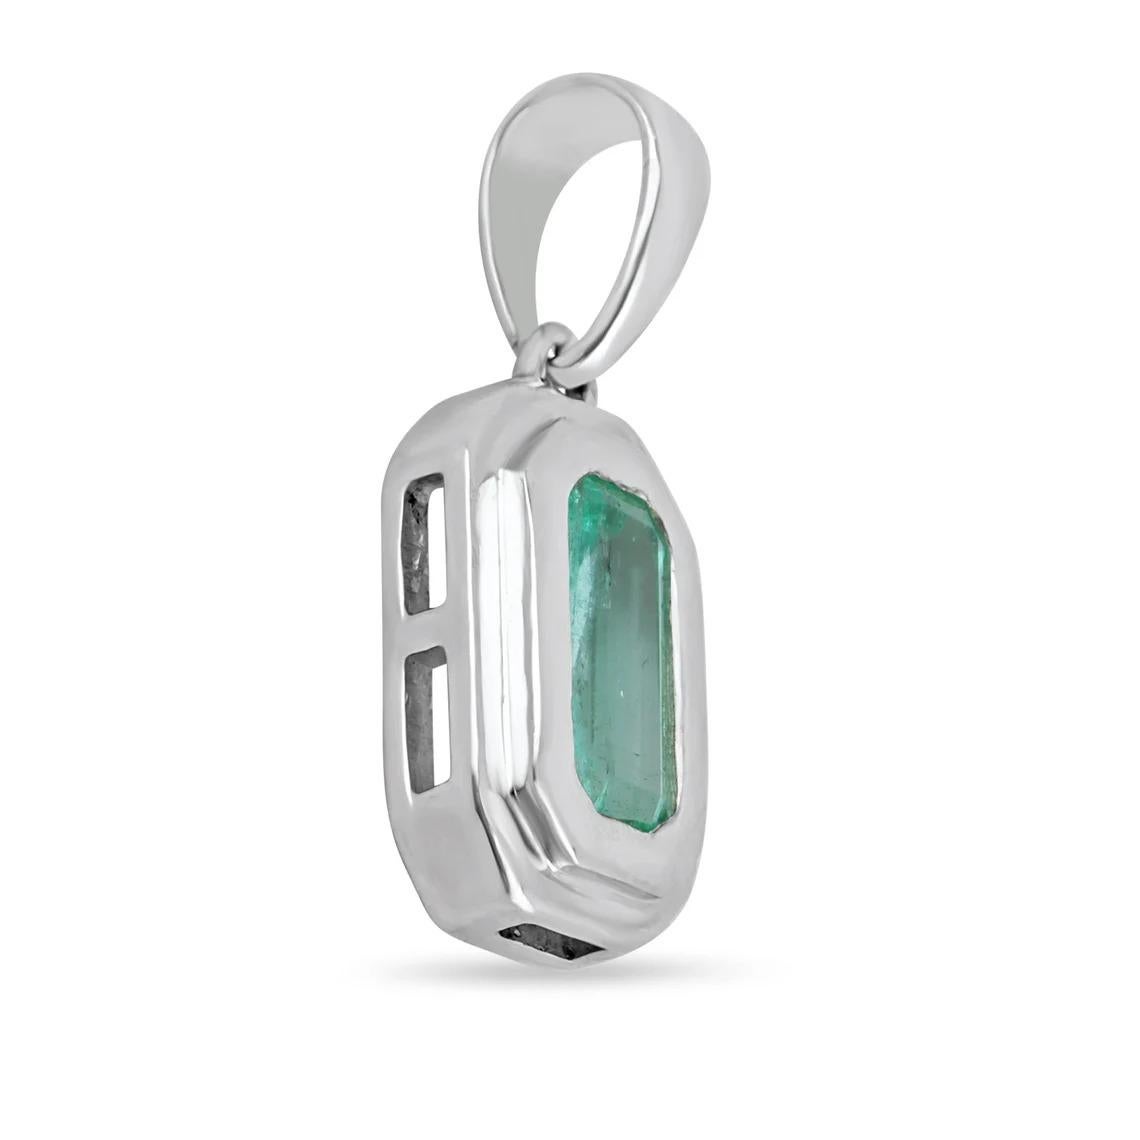 A stylish and sleek, unisex Colombian emerald pendant. This special piece showcases a remarkable 1.40-carat, elongated emerald cut emerald. The gemstone displays a beautiful medium-light spring green color, with excellent luster and very good eye